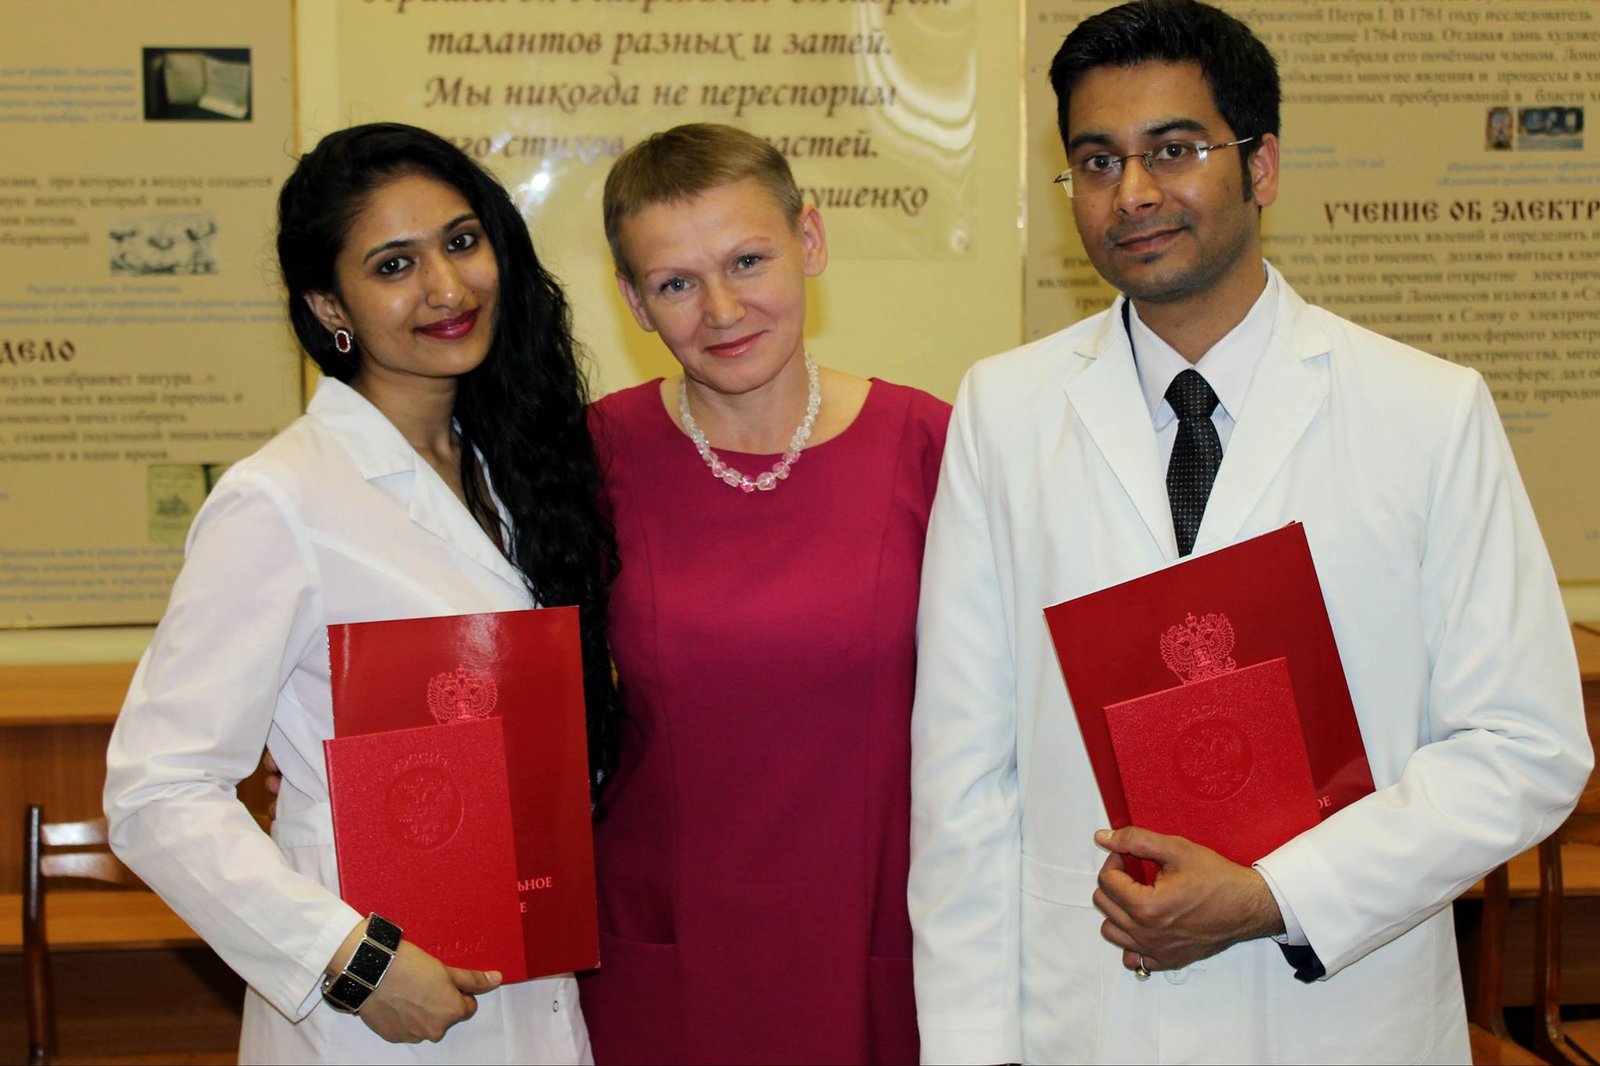 Northern State Medical University_MBBS in Russia_RICH GLOBAL EDU